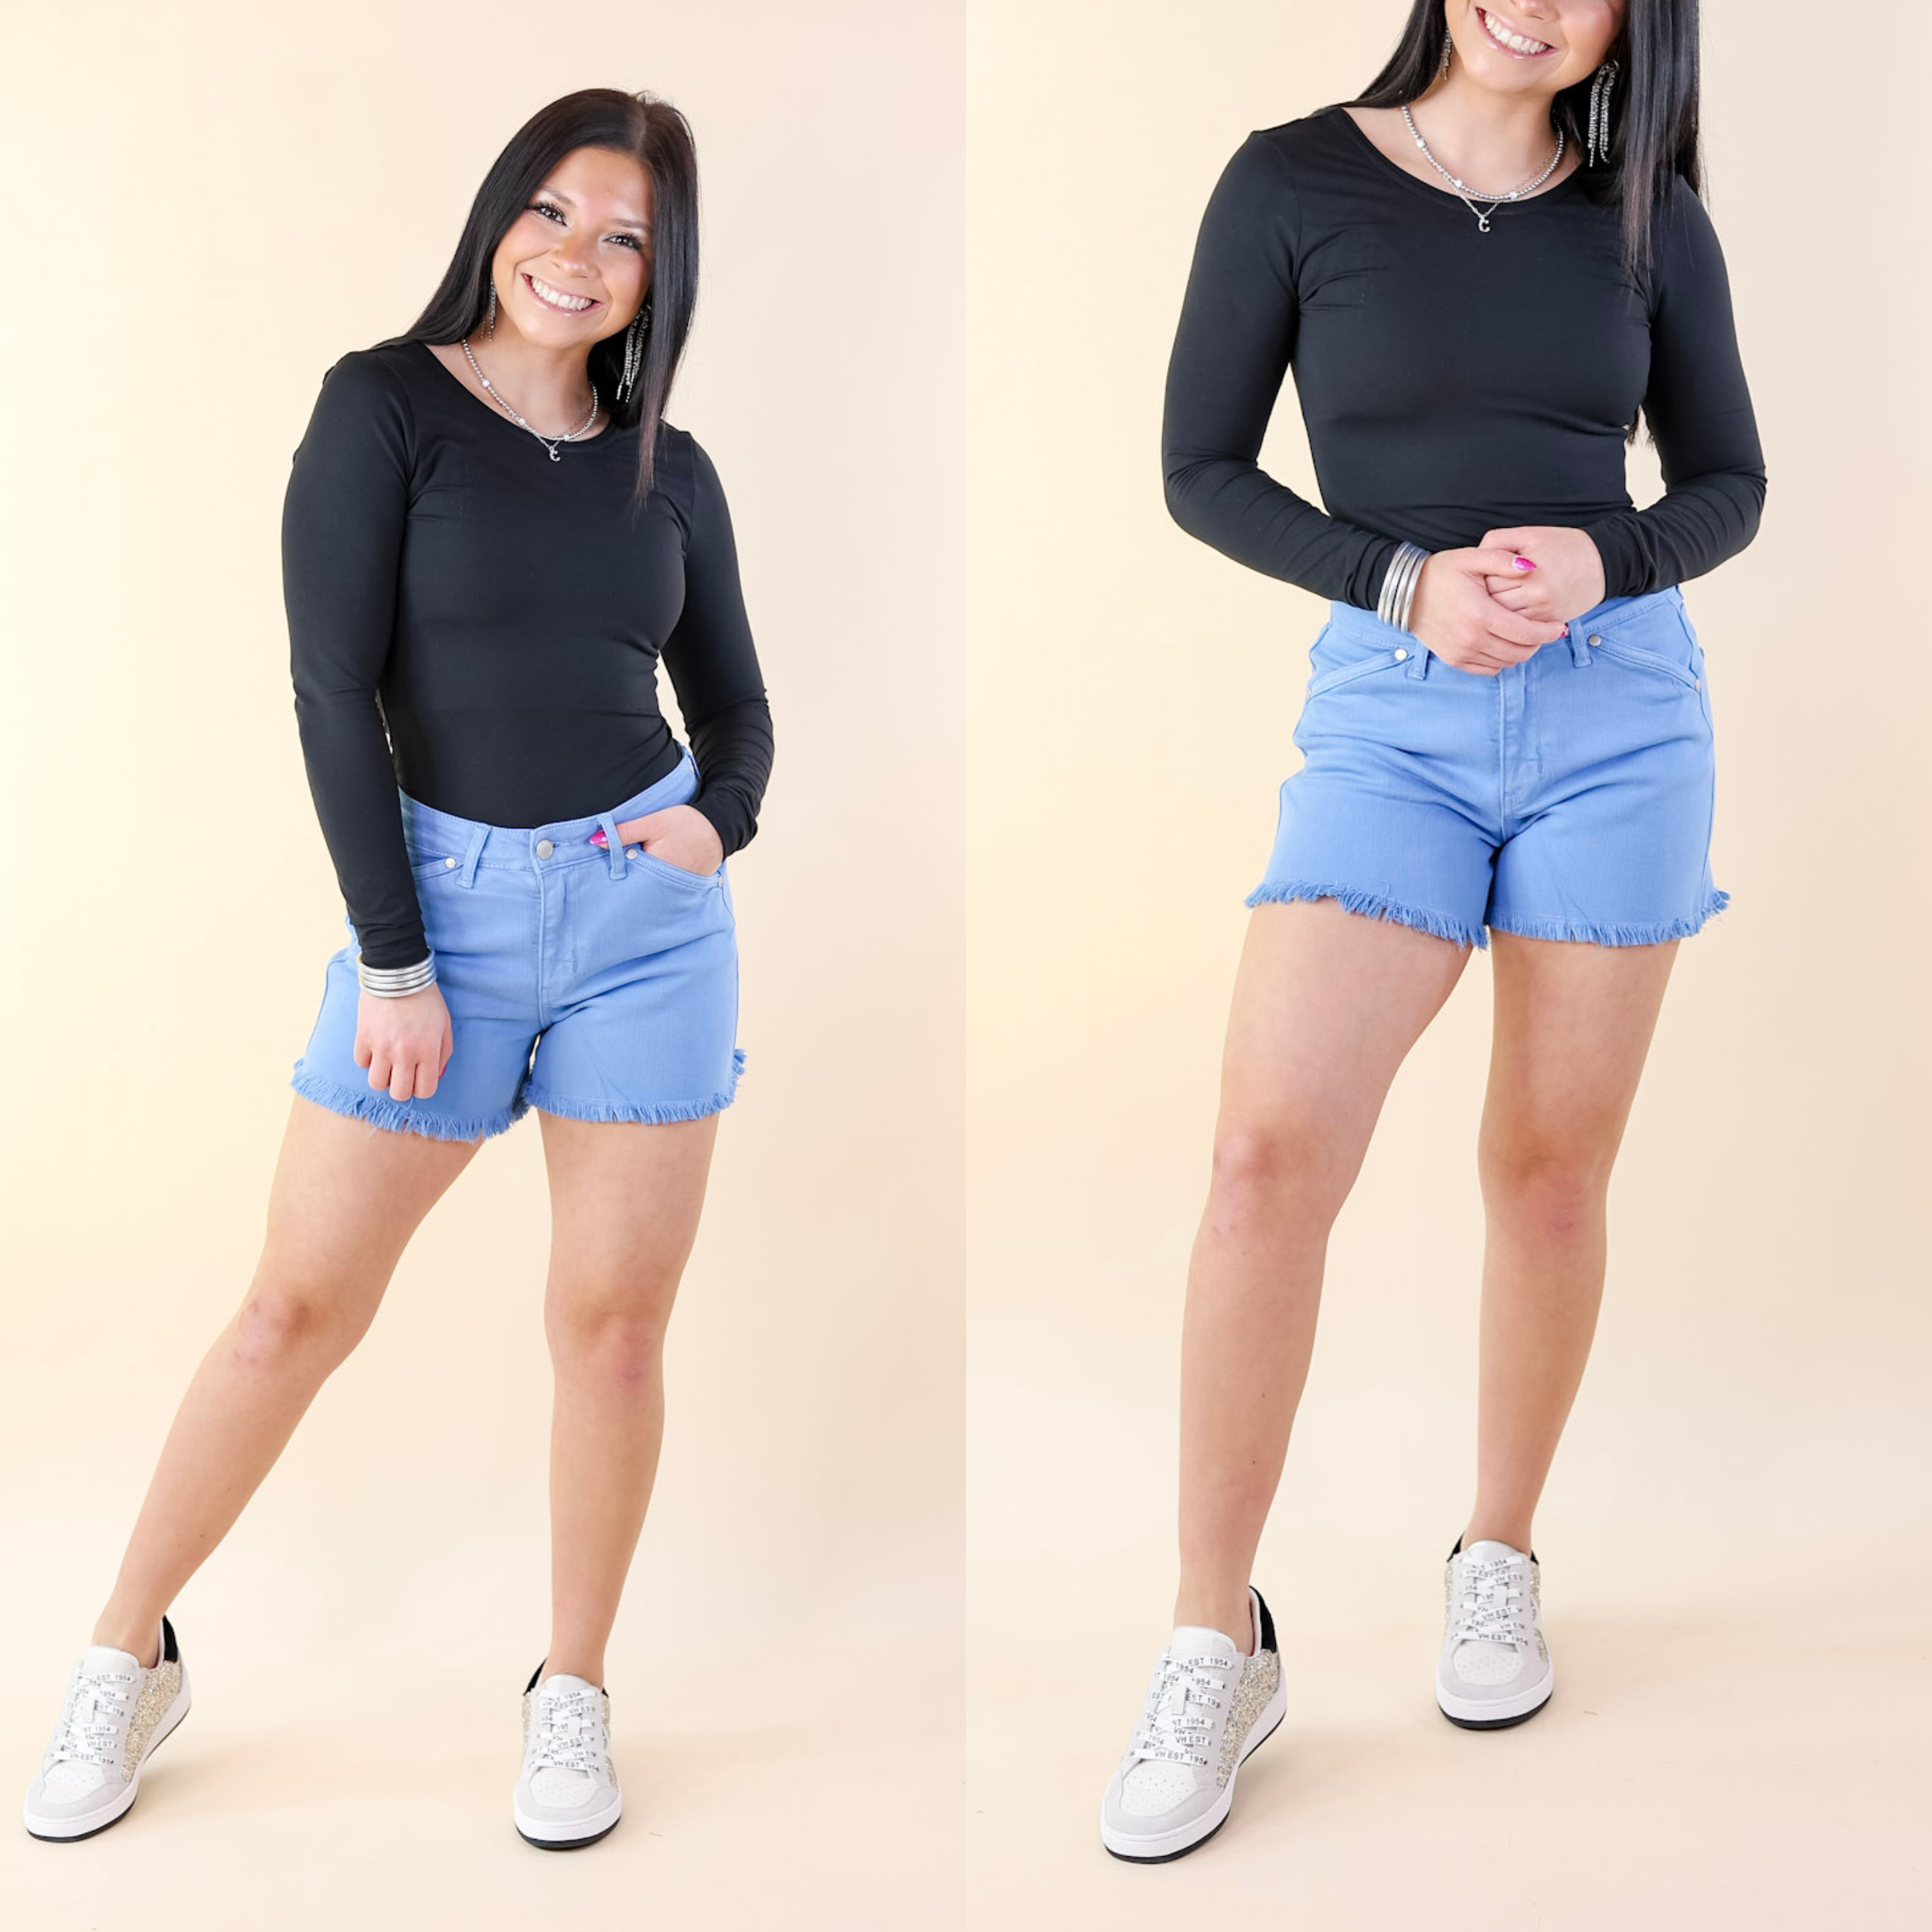 Judy Blue | Sunlight Spectrum Garment Dyed Fray Hem Shorts in Sky Blue Wash - Giddy Up Glamour Boutique